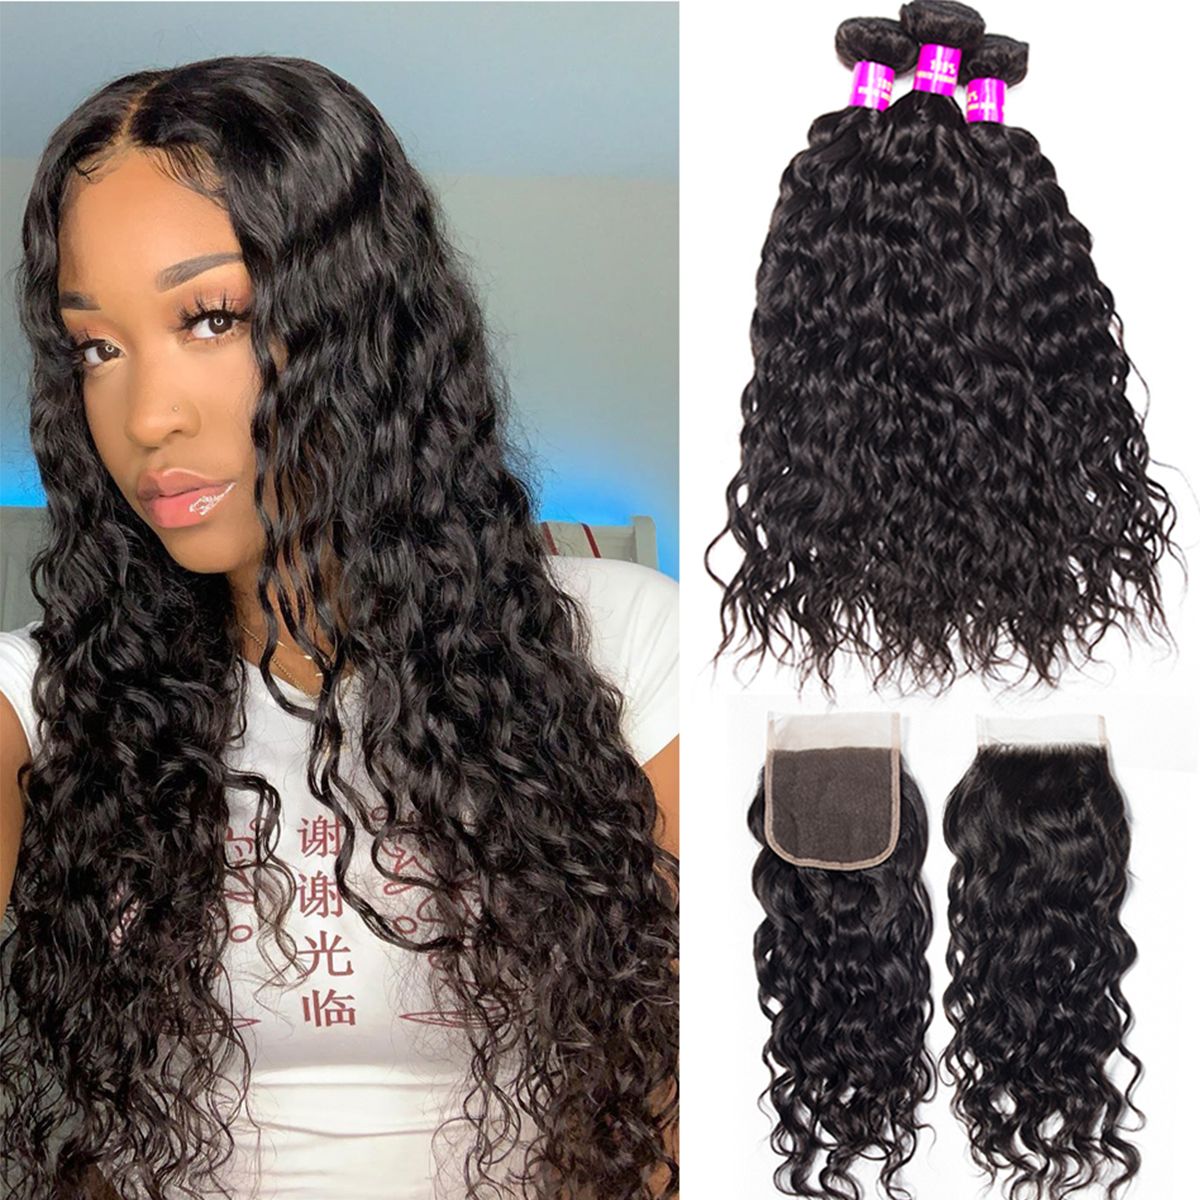 3 Bundles With Closure Brazilian Wet And Wavy Human Hair Weave Bundles With Closure Natural Color